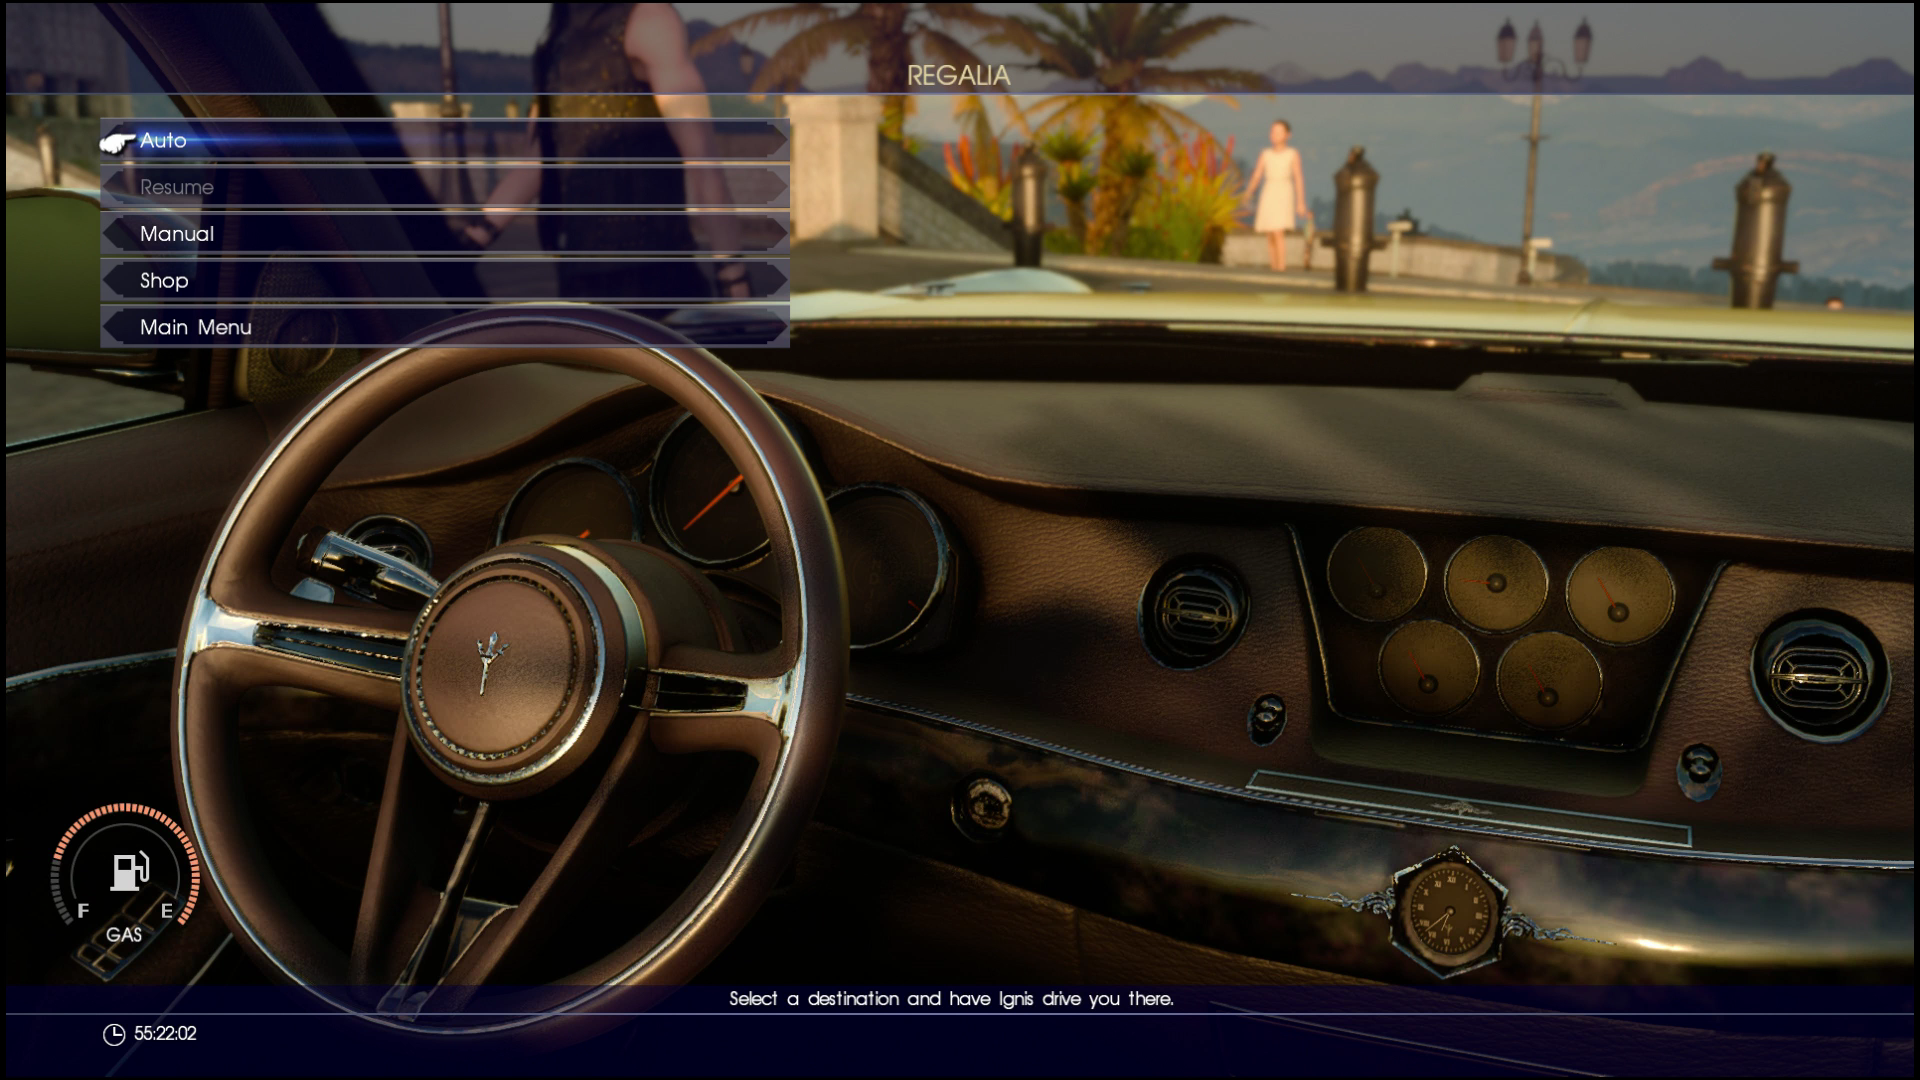 Final Fantasy 15’s User Interface Is So Bad